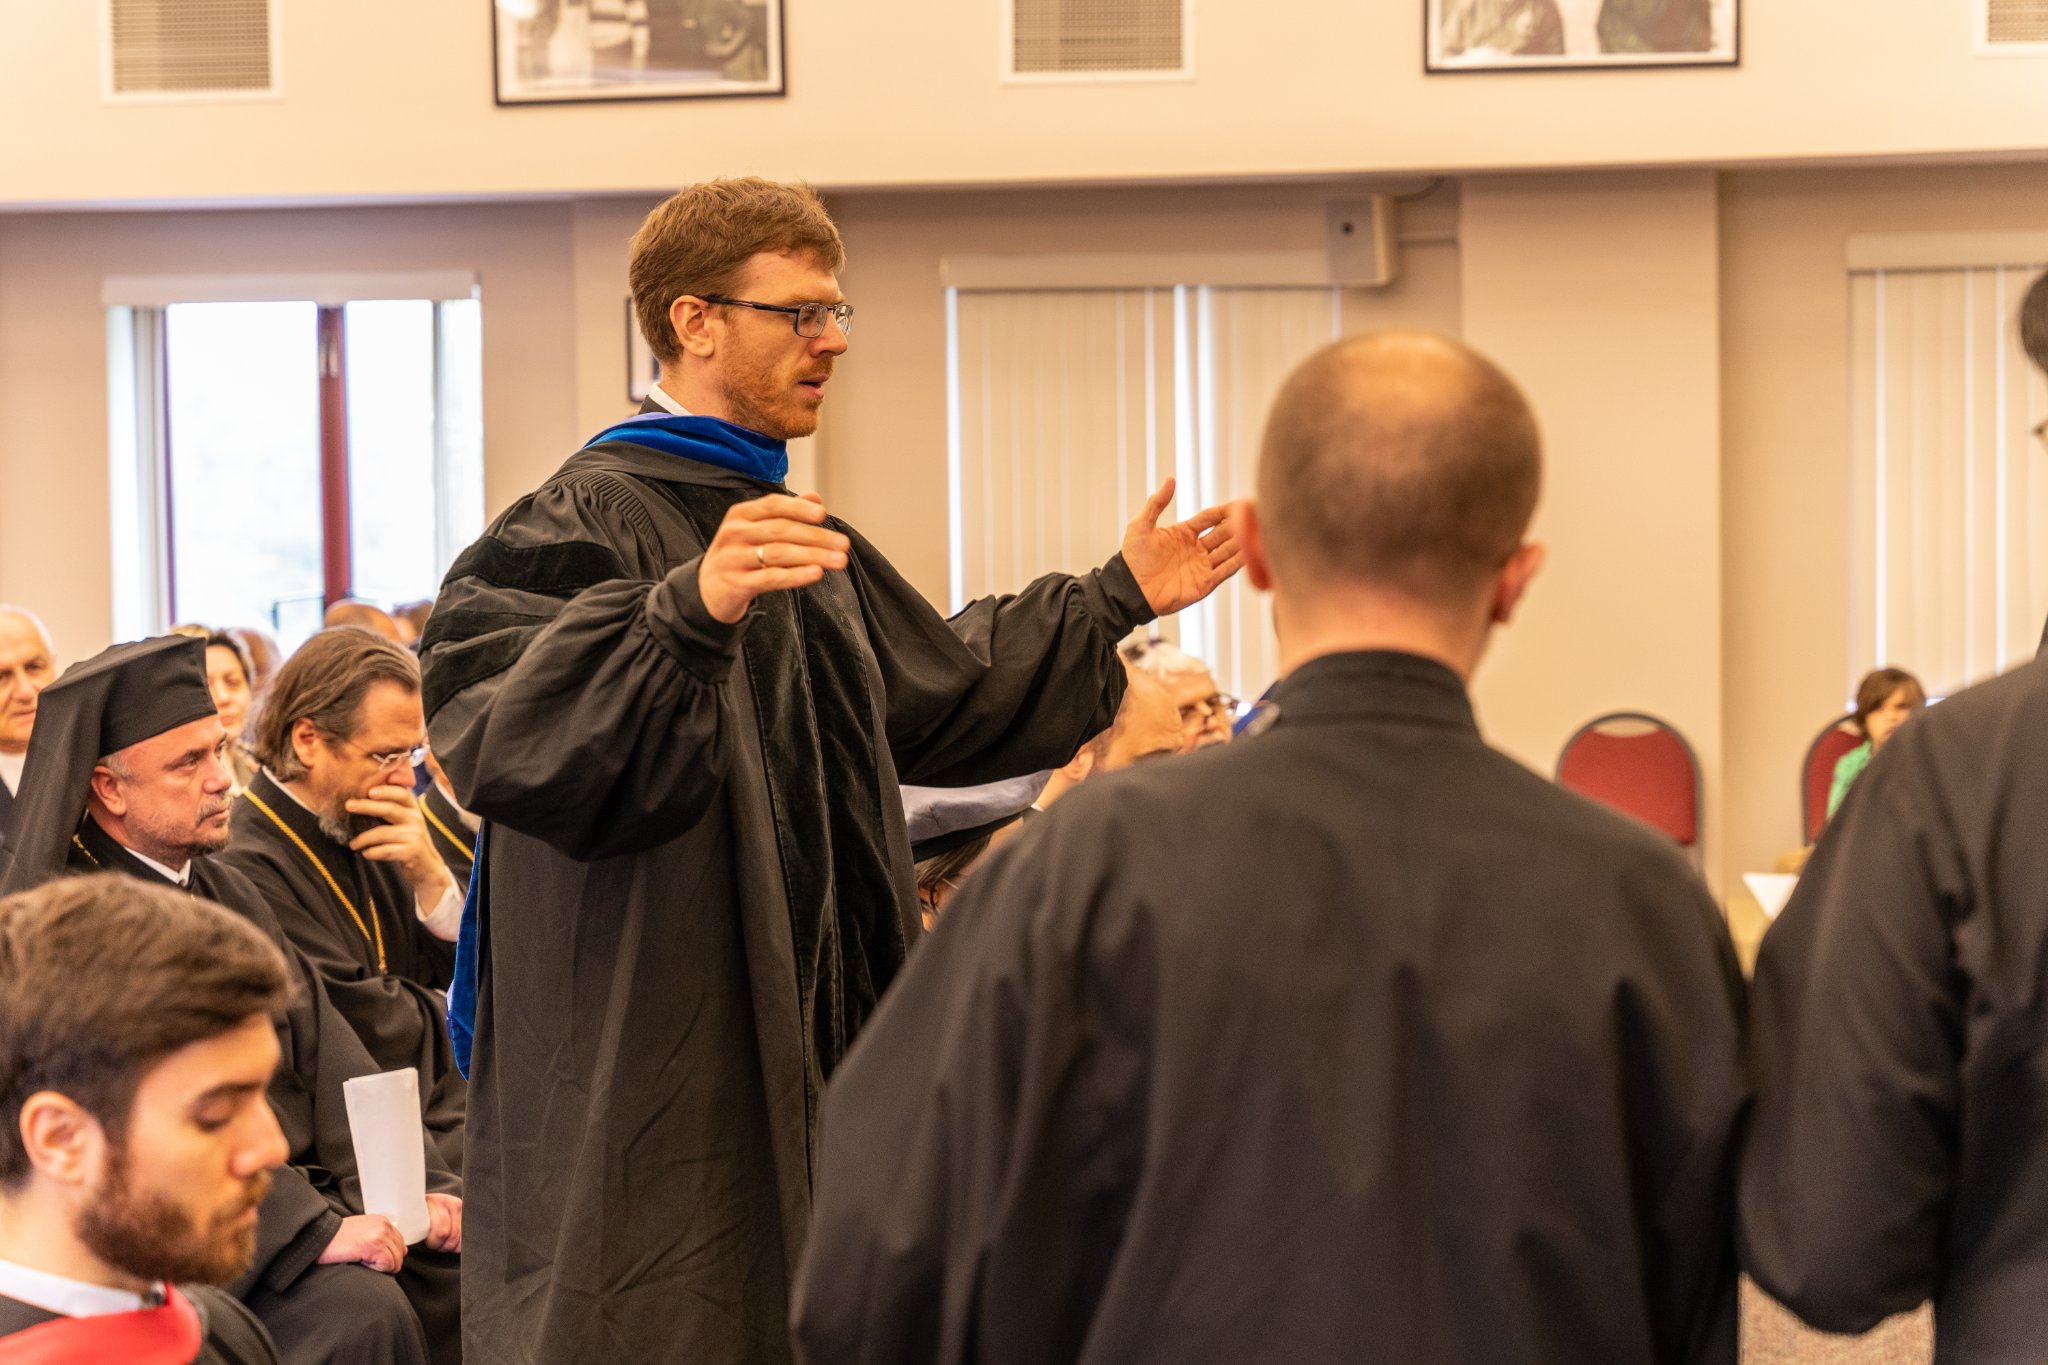 Dr Harrison Russin conducts a choral performance during commencement